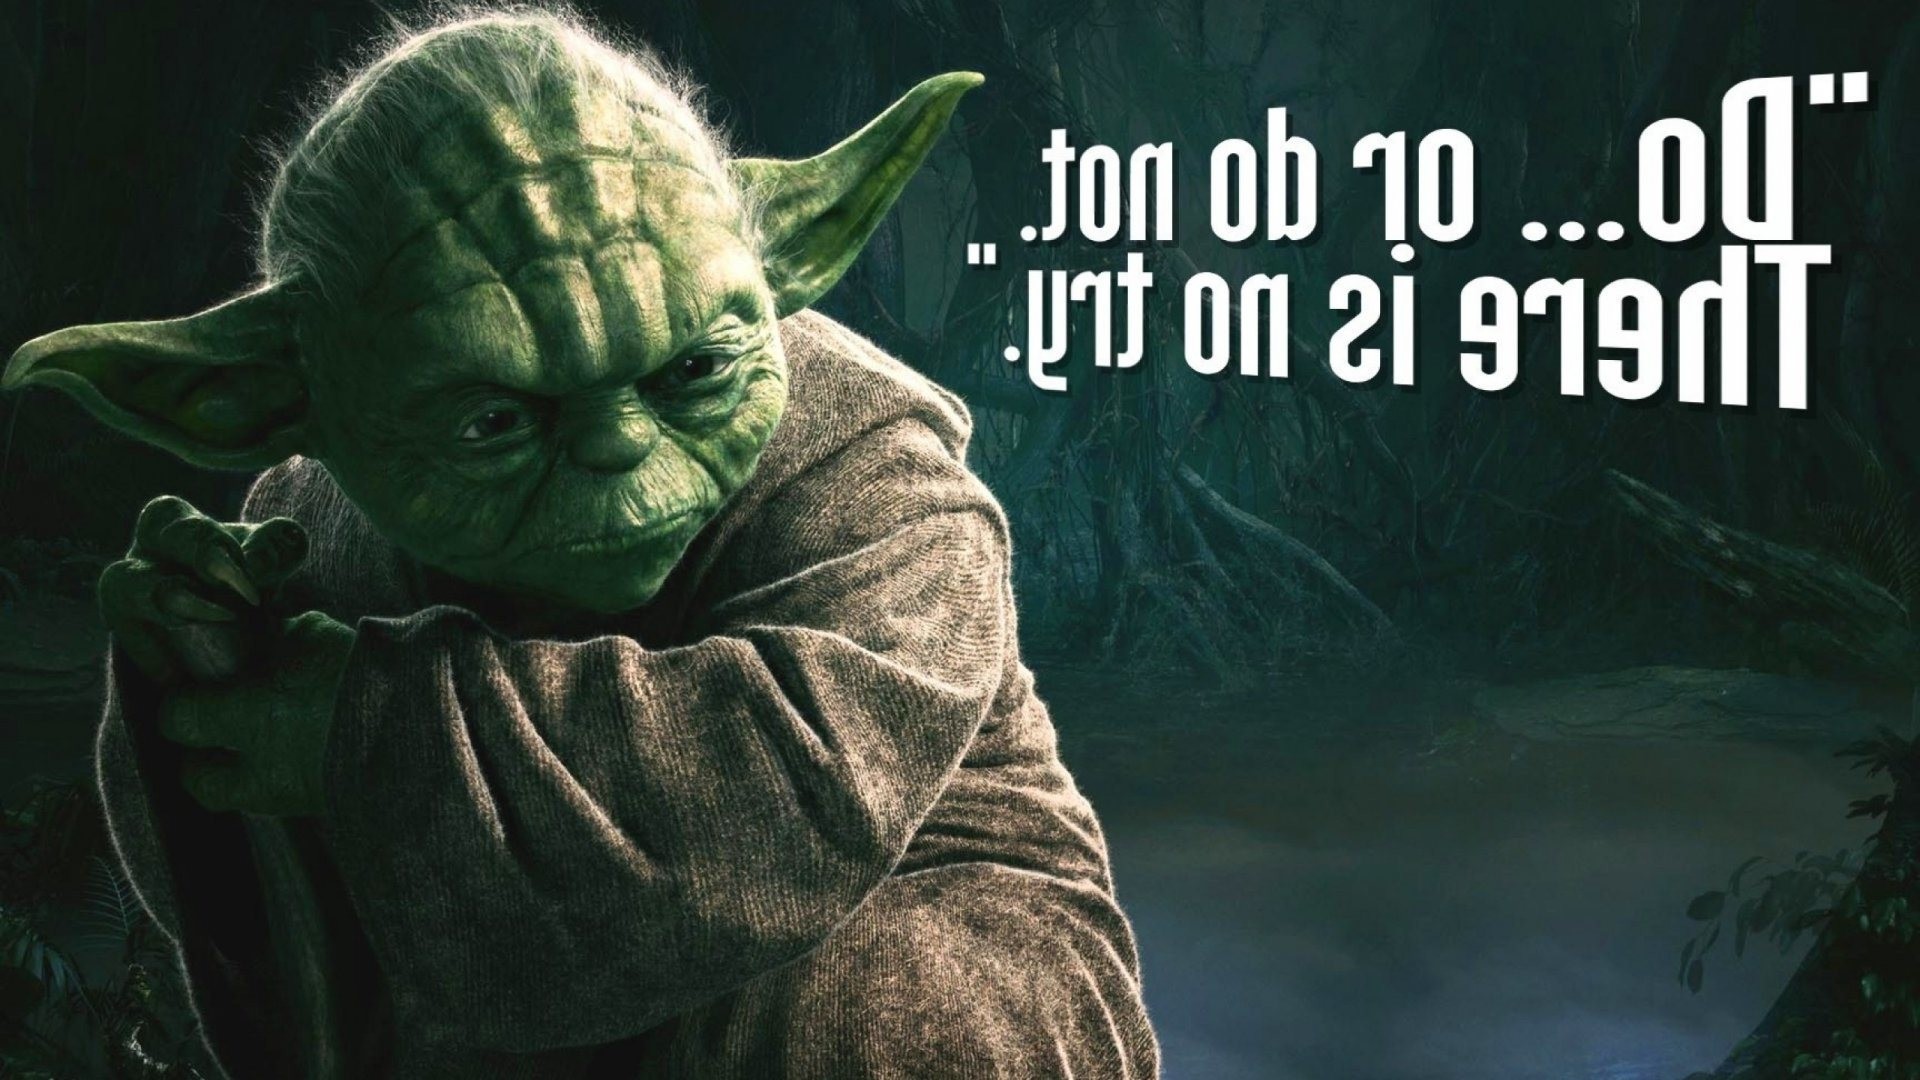 1920x1080 Funny quotes wallpapers HD religion photo Humor funny motivational star  wars wallpapers 